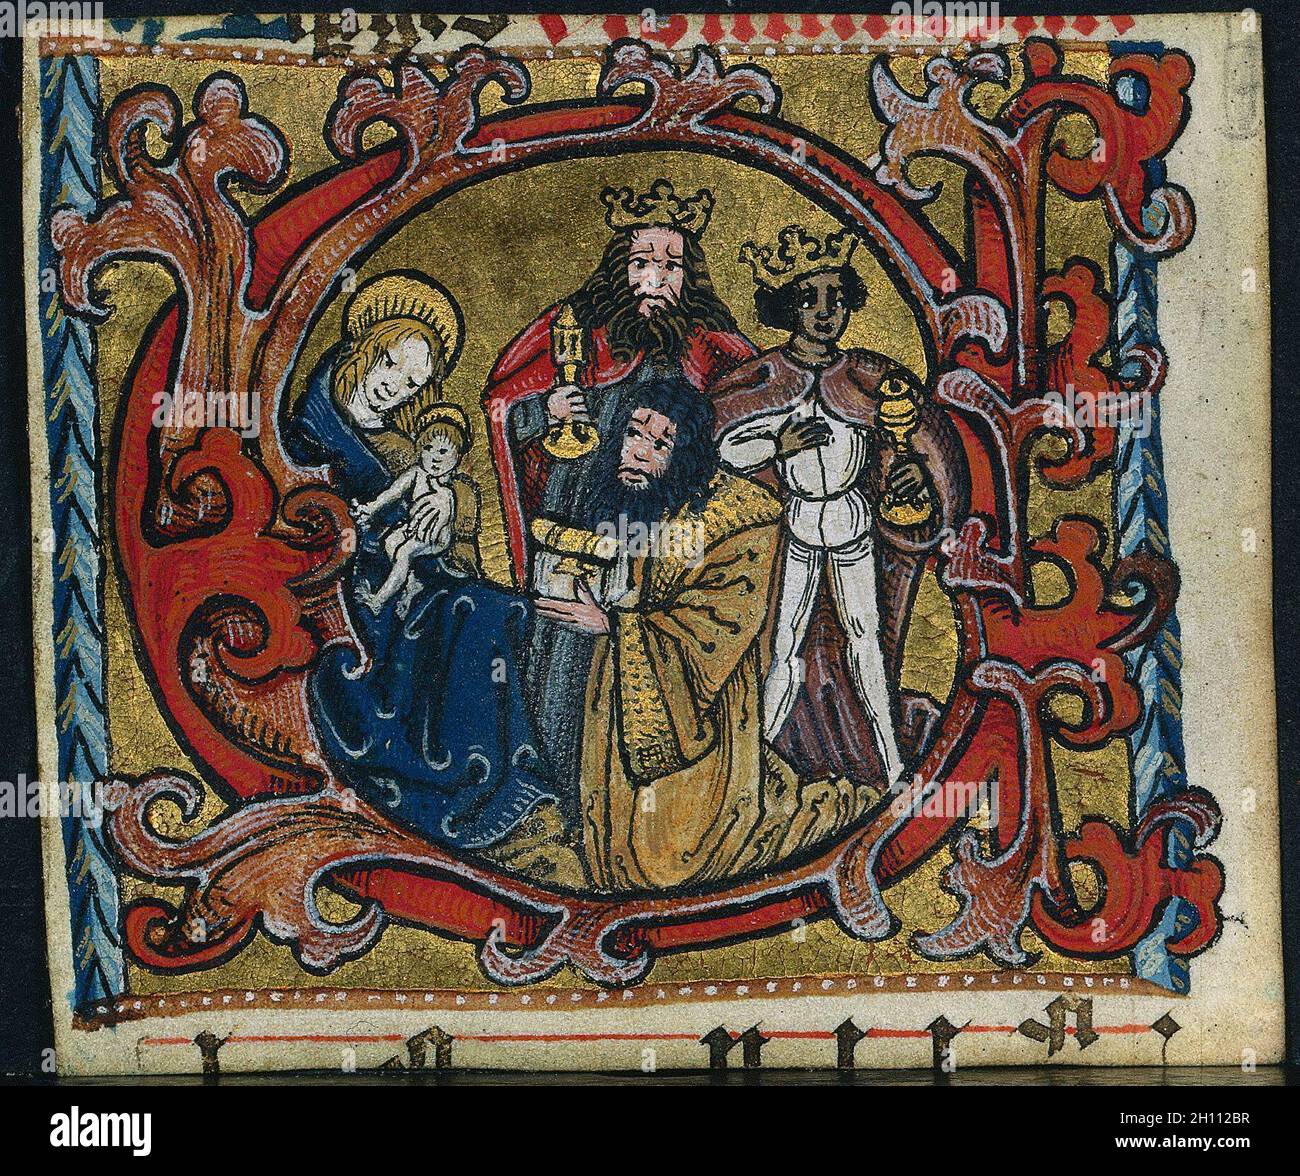 Three Cuttings from a Missal: Initial C with the Adoration of the Magi, c. 1470-1500. Germany, Franconia or Saxony (?) or Silesia (?), 15th century. Ink, tempera and gold on vellum; each leaf: 9.4 x 8 cm (3 11/16 x 3 1/8 in.). Stock Photo